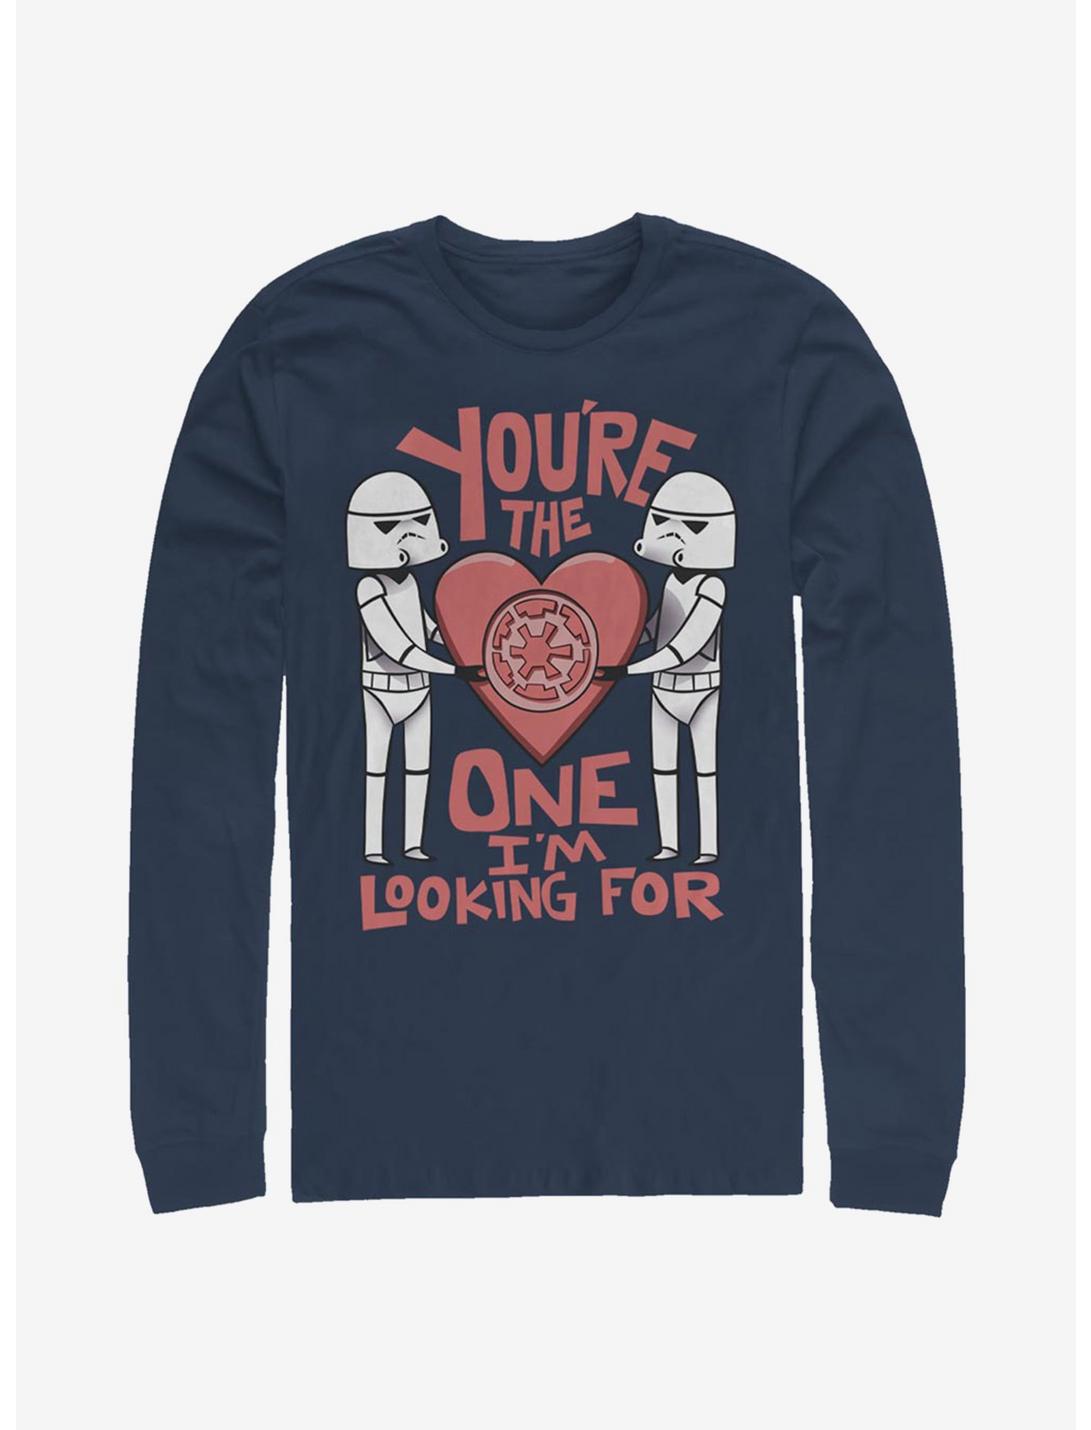 Star Wars Droid Looking For Long-Sleeve T-Shirt, NAVY, hi-res